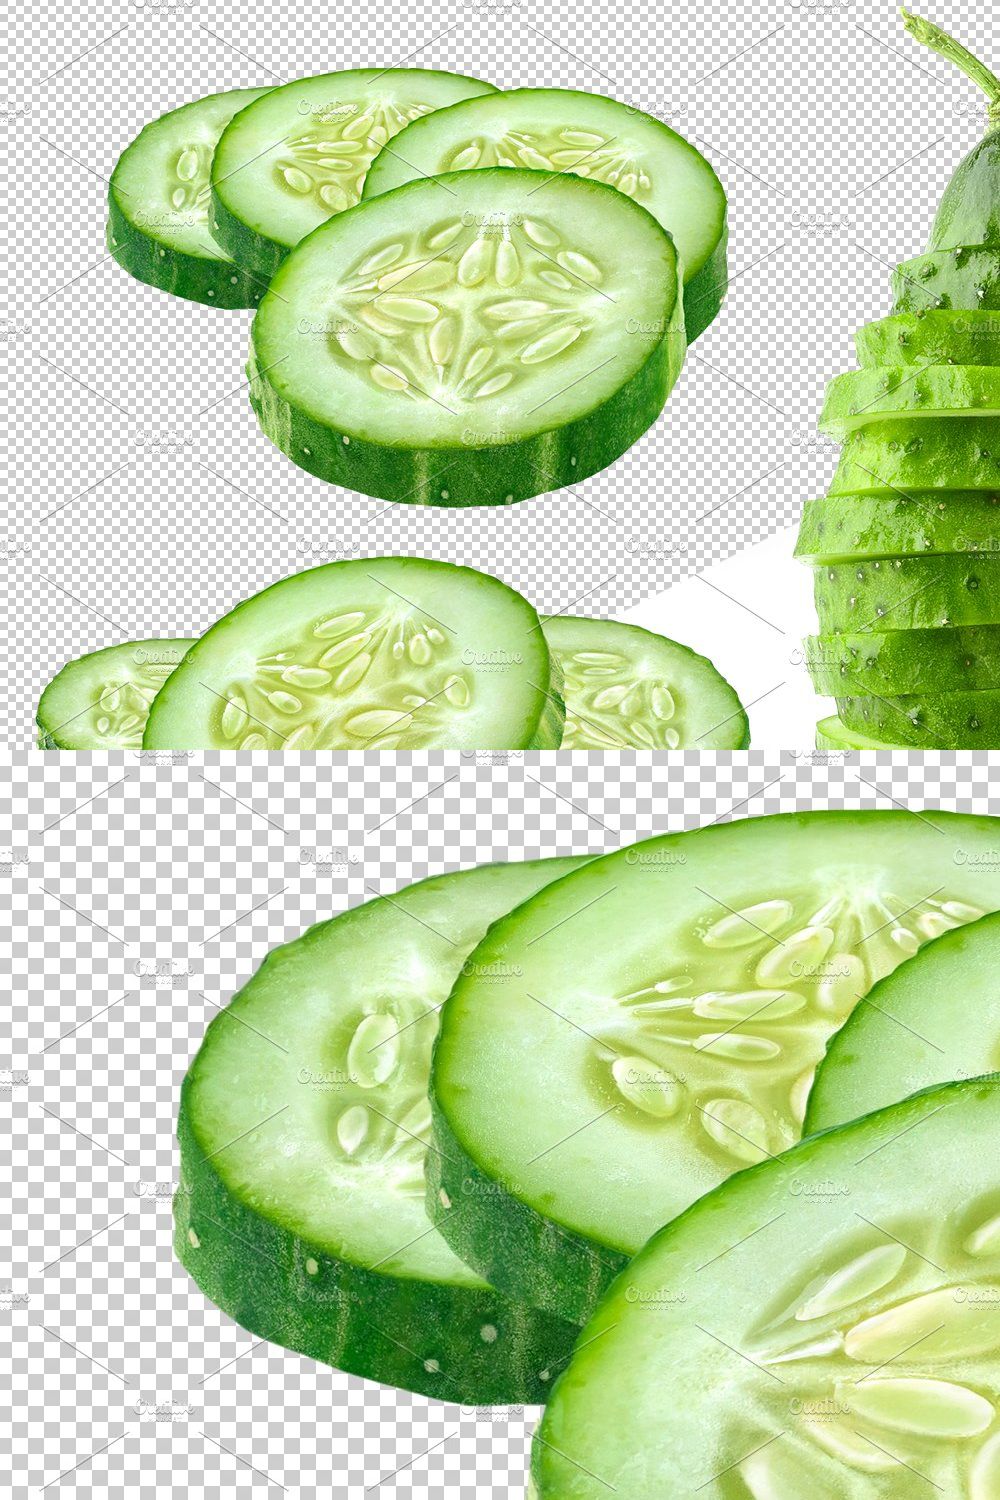 Cucumber slices pinterest preview image.